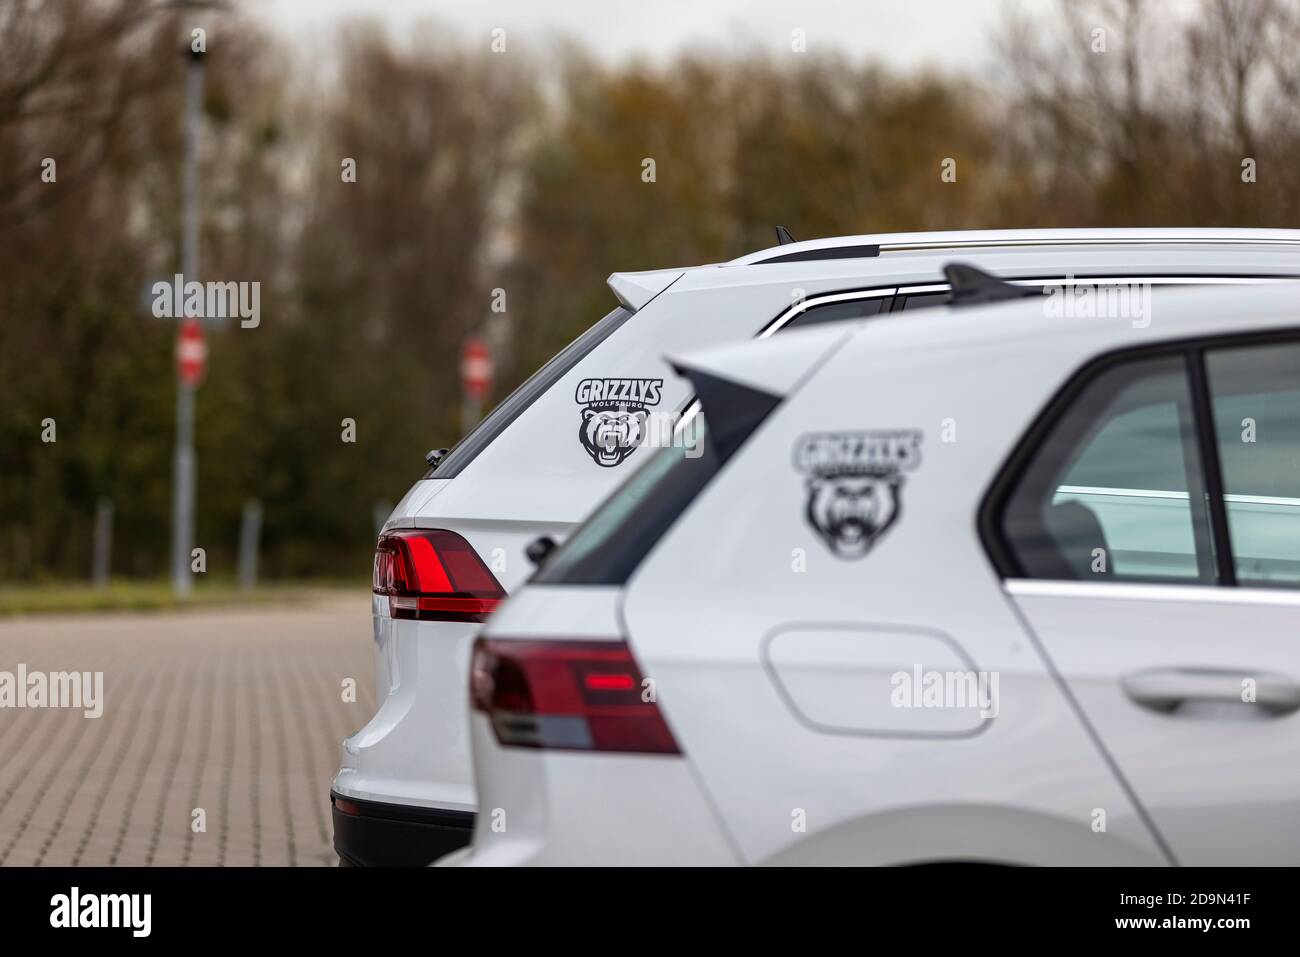 Volkswagen is the main sponsor of Grizzlys Wolfsburg professional ice hockey team. Hence team members mainly drive Volkswagen cars. Stock Photo